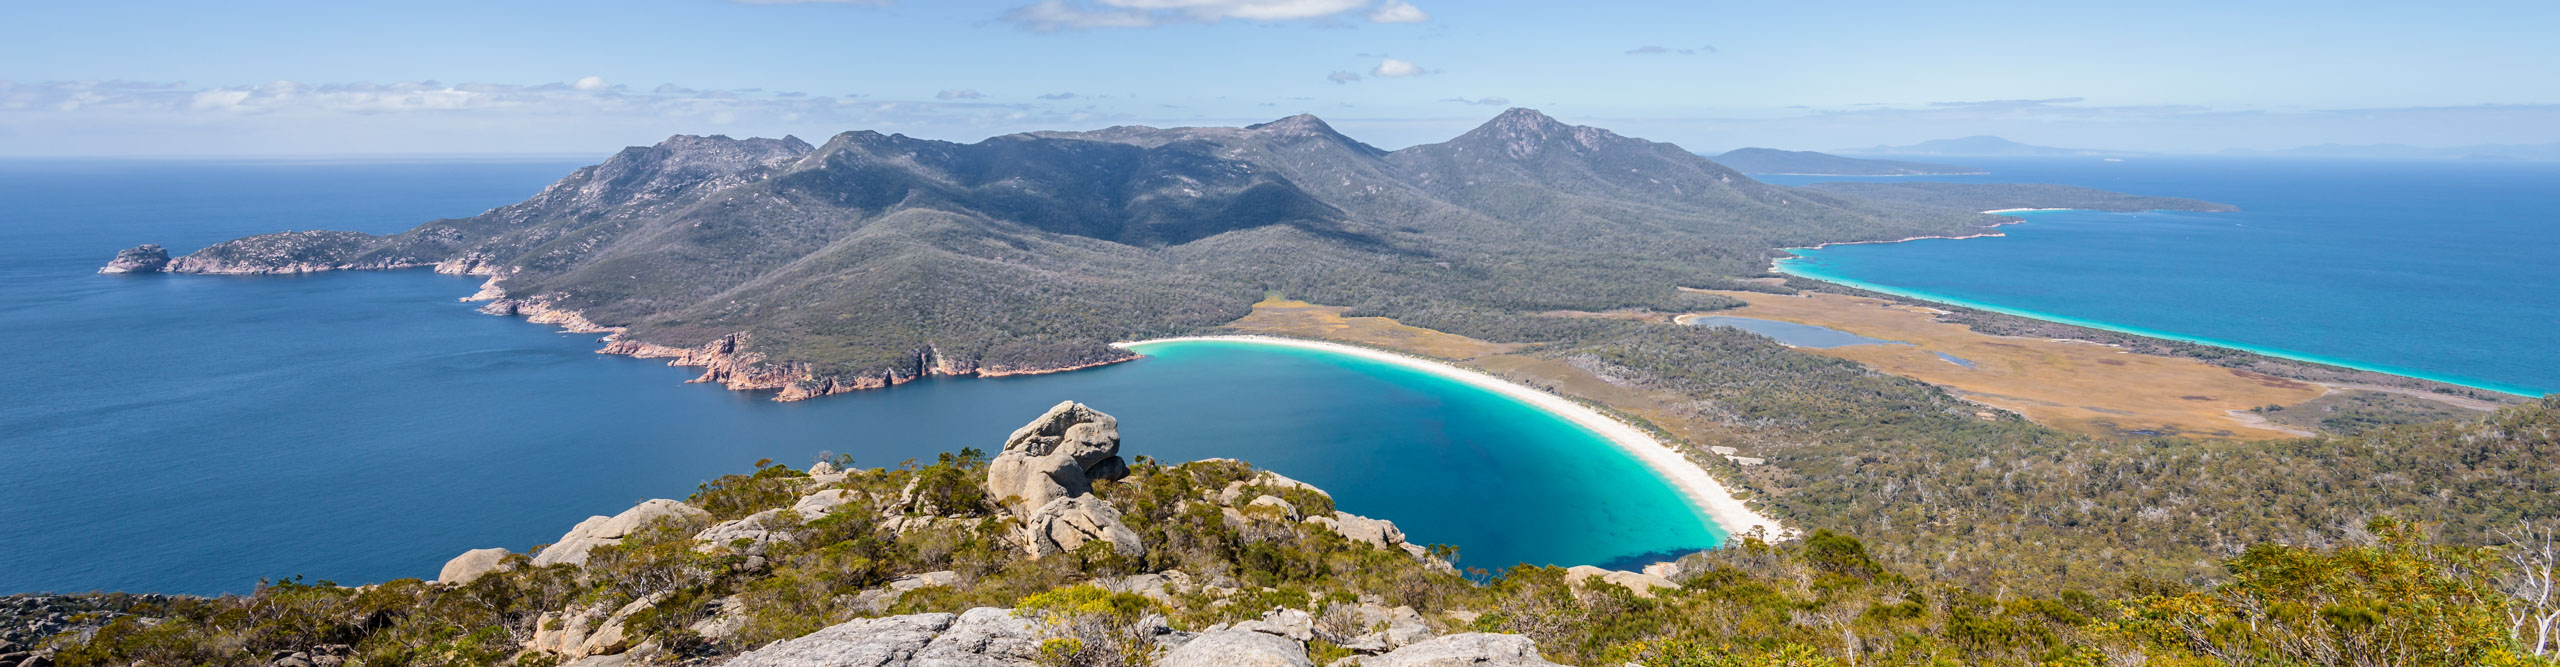 Aerial view of Wineglass bay on a clear sunny day, Tasmani, Australia 